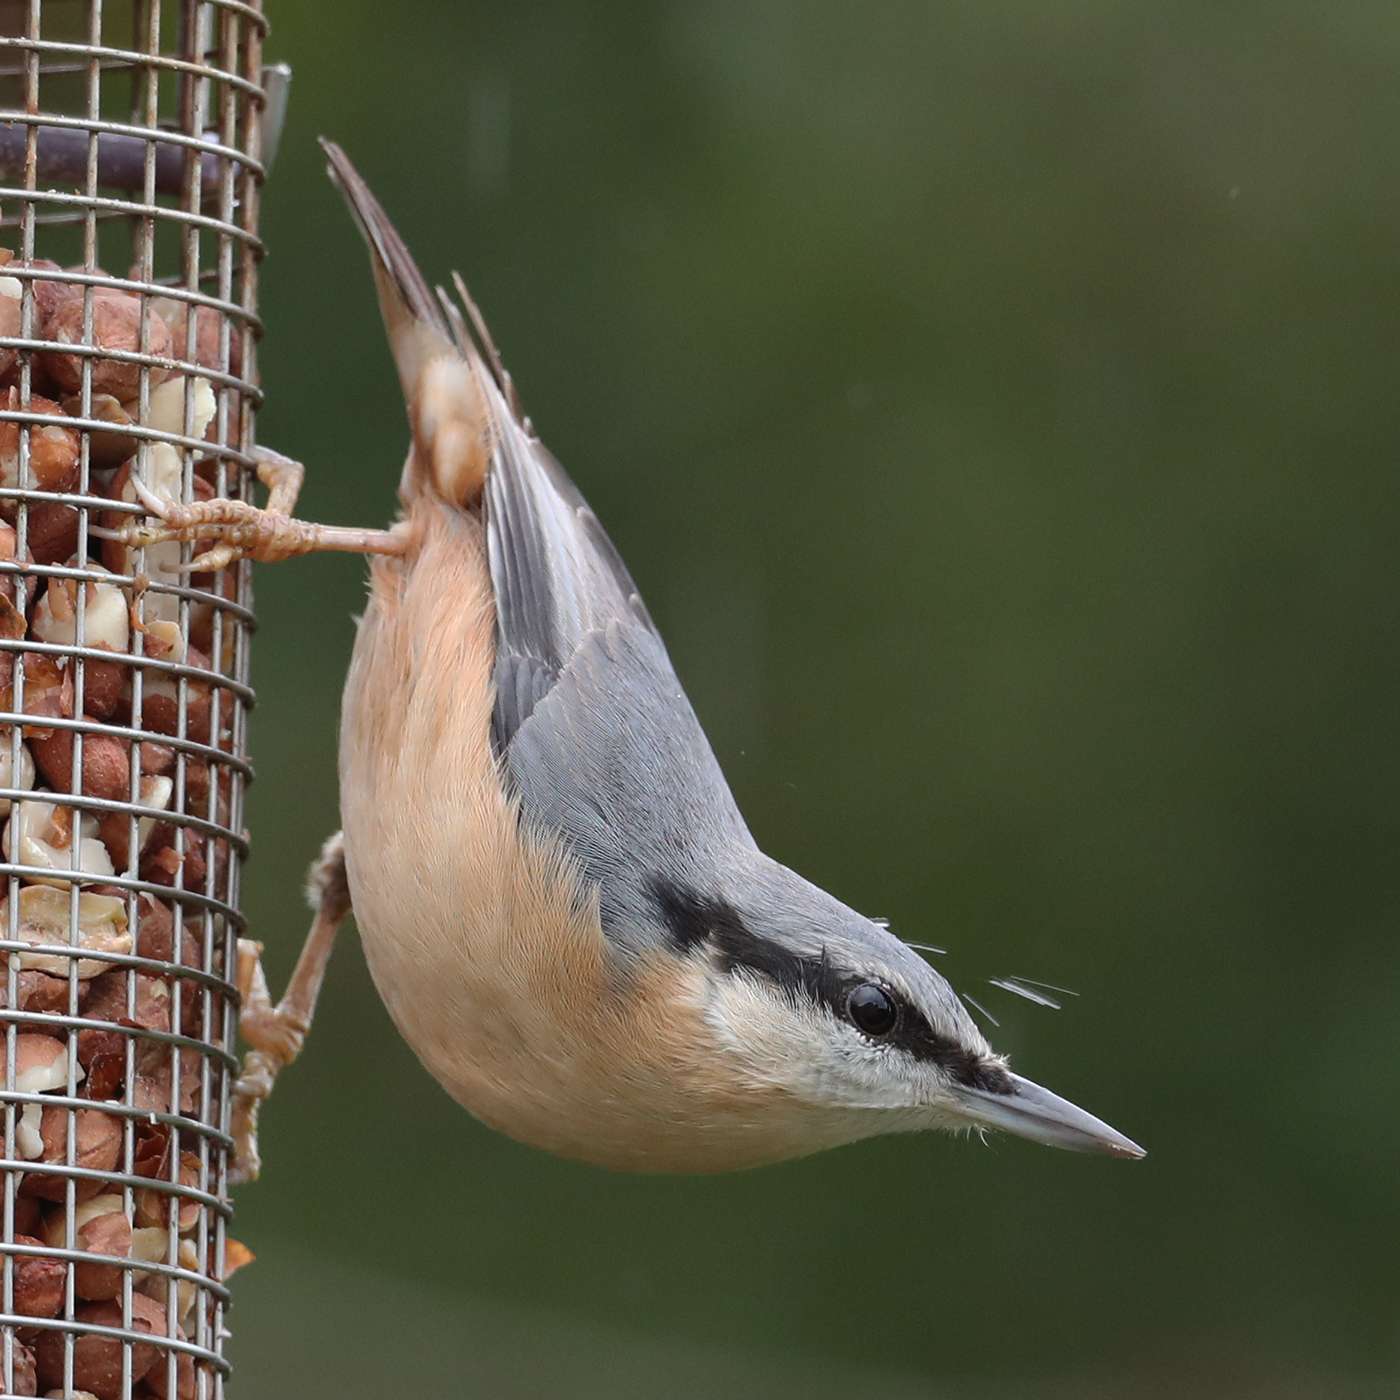 Nuthatch by Steve Hopper at South Brent